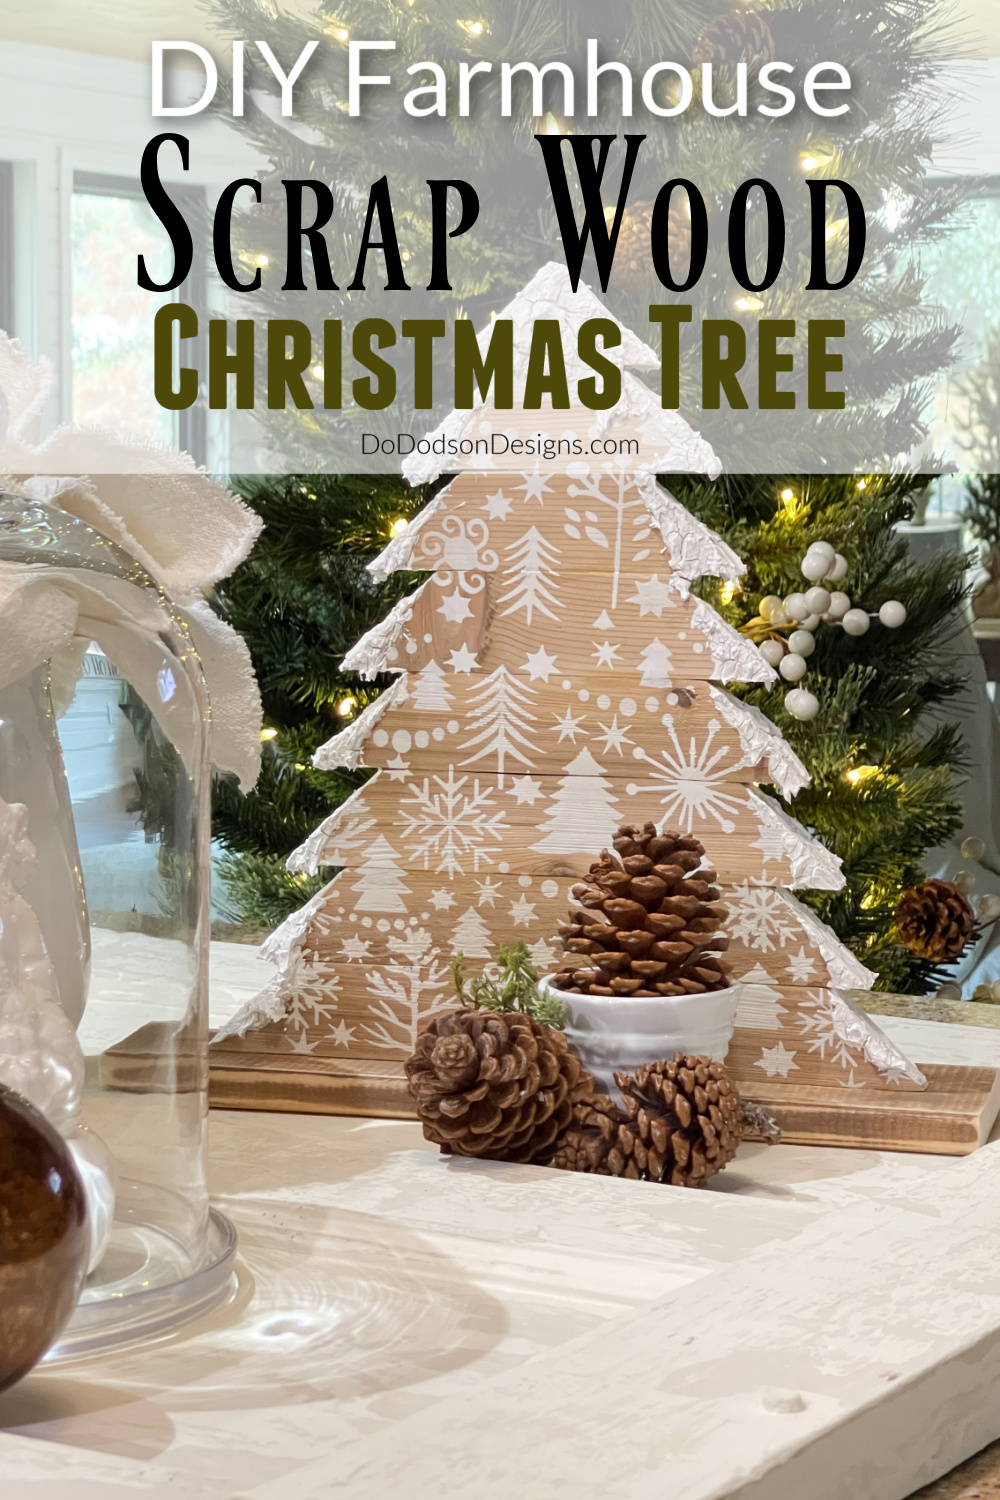 How To Make Rustic Wooden Christmas Trees (DIY Holiday Decor)